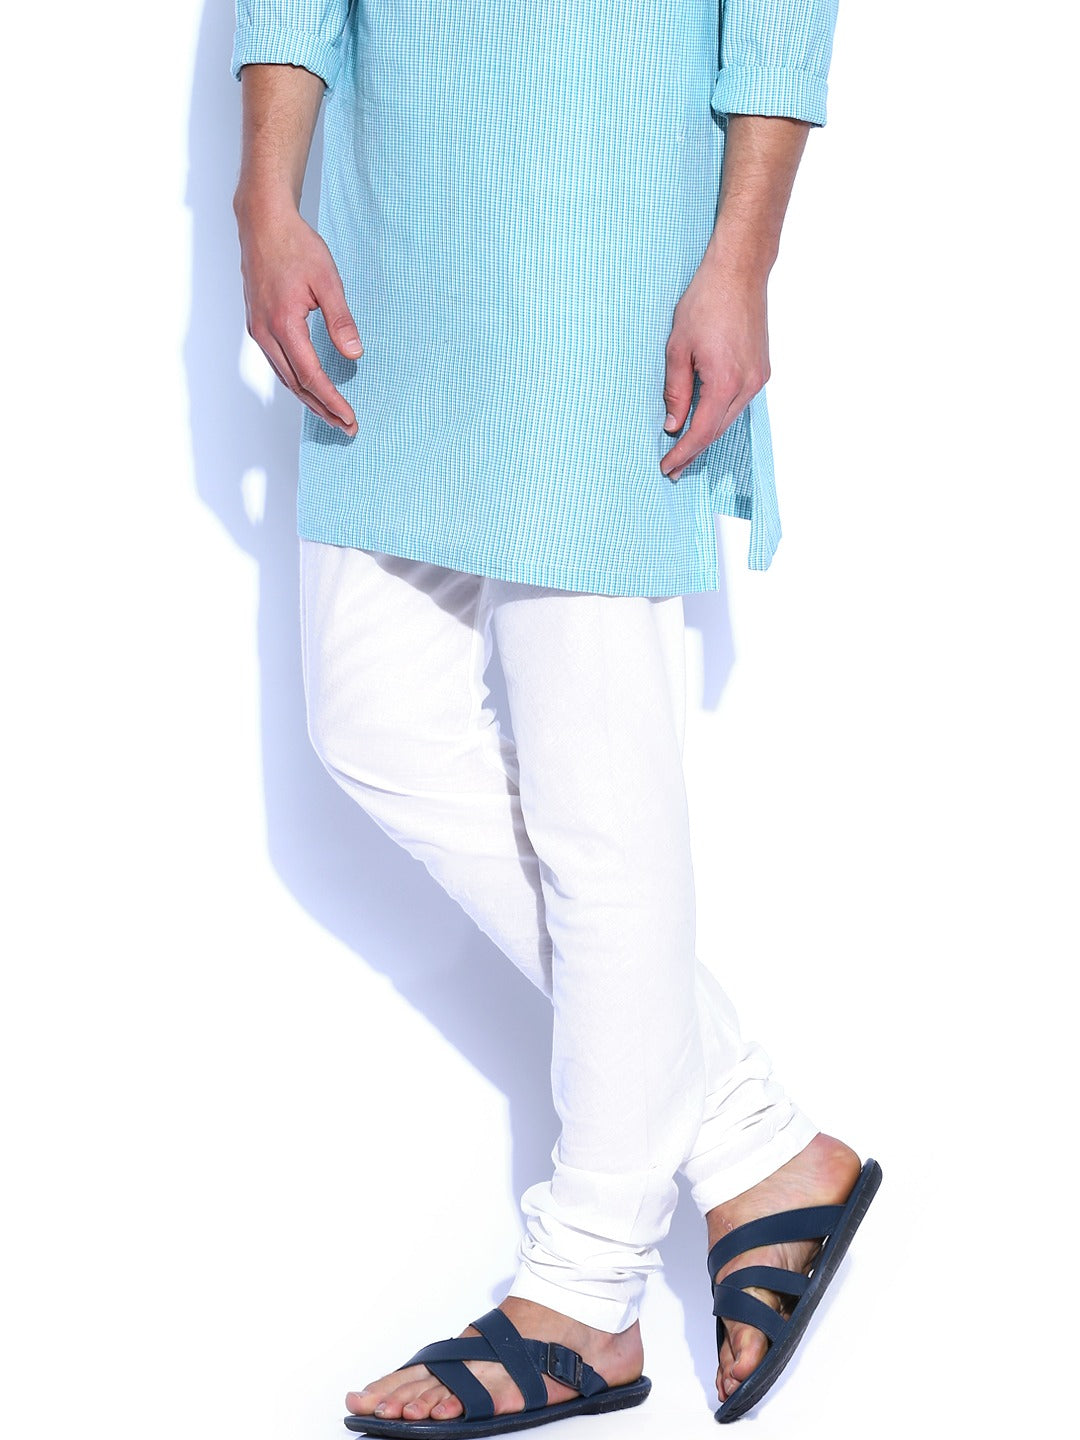 White Cotton Churidar Indian Clothing in Denver, CO, Aurora, CO, Boulder, CO, Fort Collins, CO, Colorado Springs, CO, Parker, CO, Highlands Ranch, CO, Cherry Creek, CO, Centennial, CO, and Longmont, CO. NATIONWIDE SHIPPING USA- India Fashion X